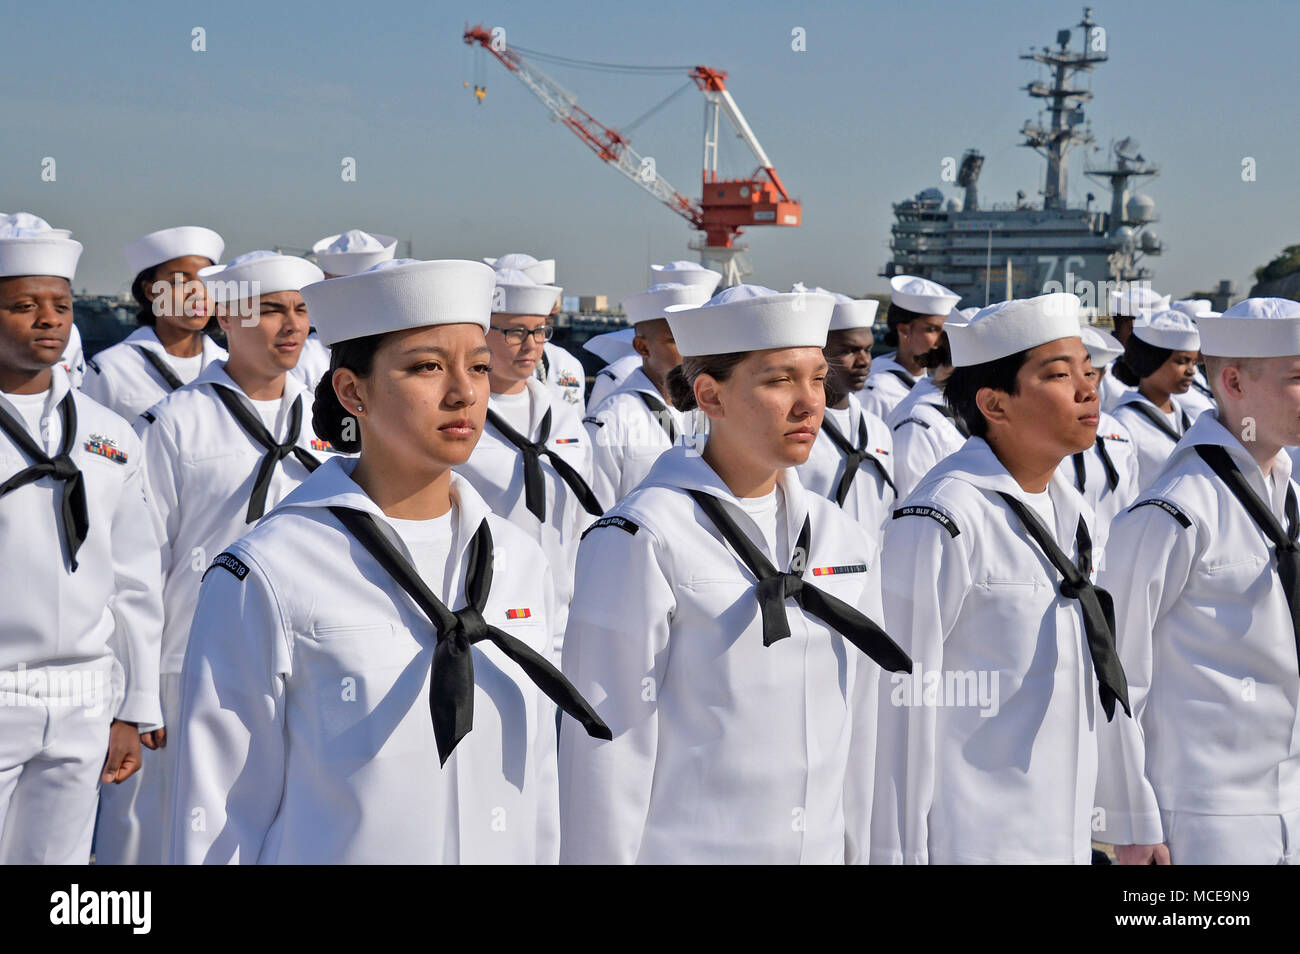 180410-N-DS193-218 YOKOSUKA, Japan (April 10, 2018) - Sailors stand in  formation during a dress whites inspection on the flight deck of USS Blue  Ridge (LCC 19). Dress uniform inspections are held by-annually